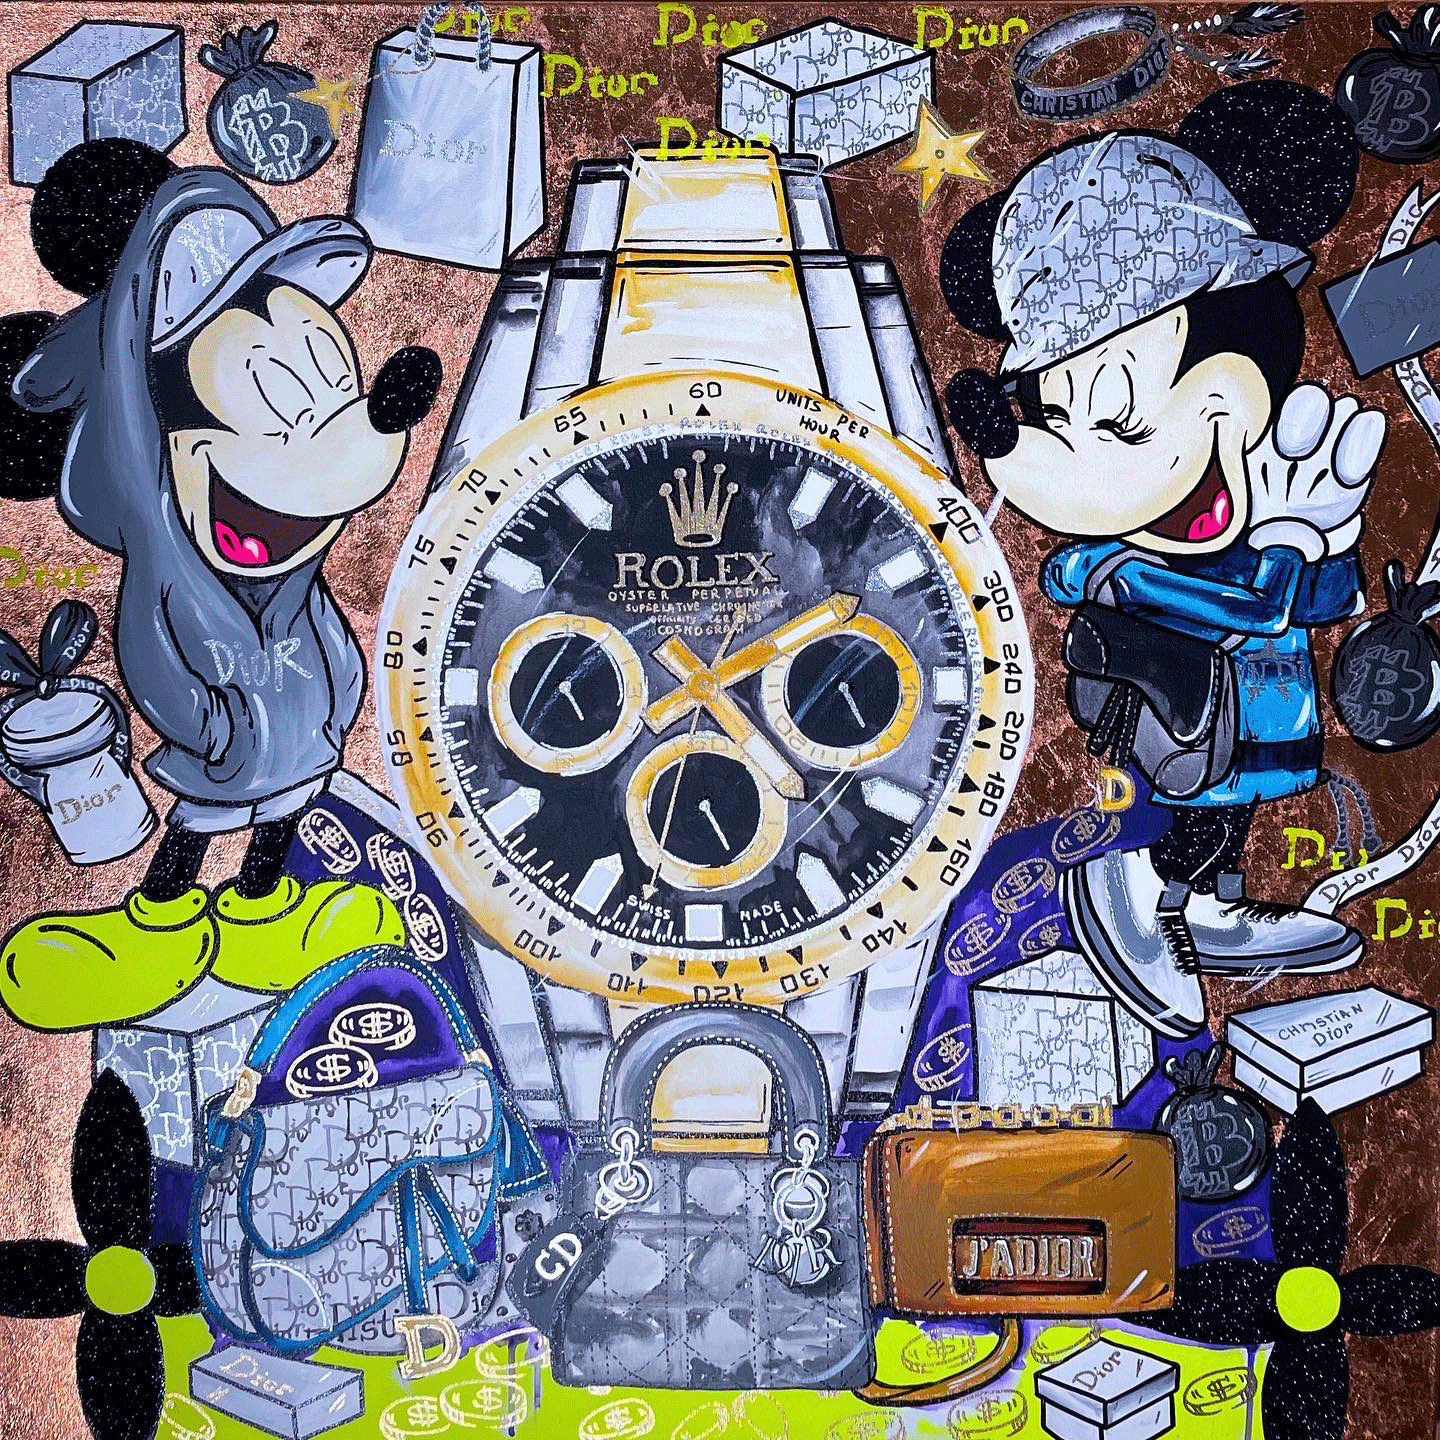 Daria Hil "Mickey and Minnie Mouse in love with Rolex (2)"